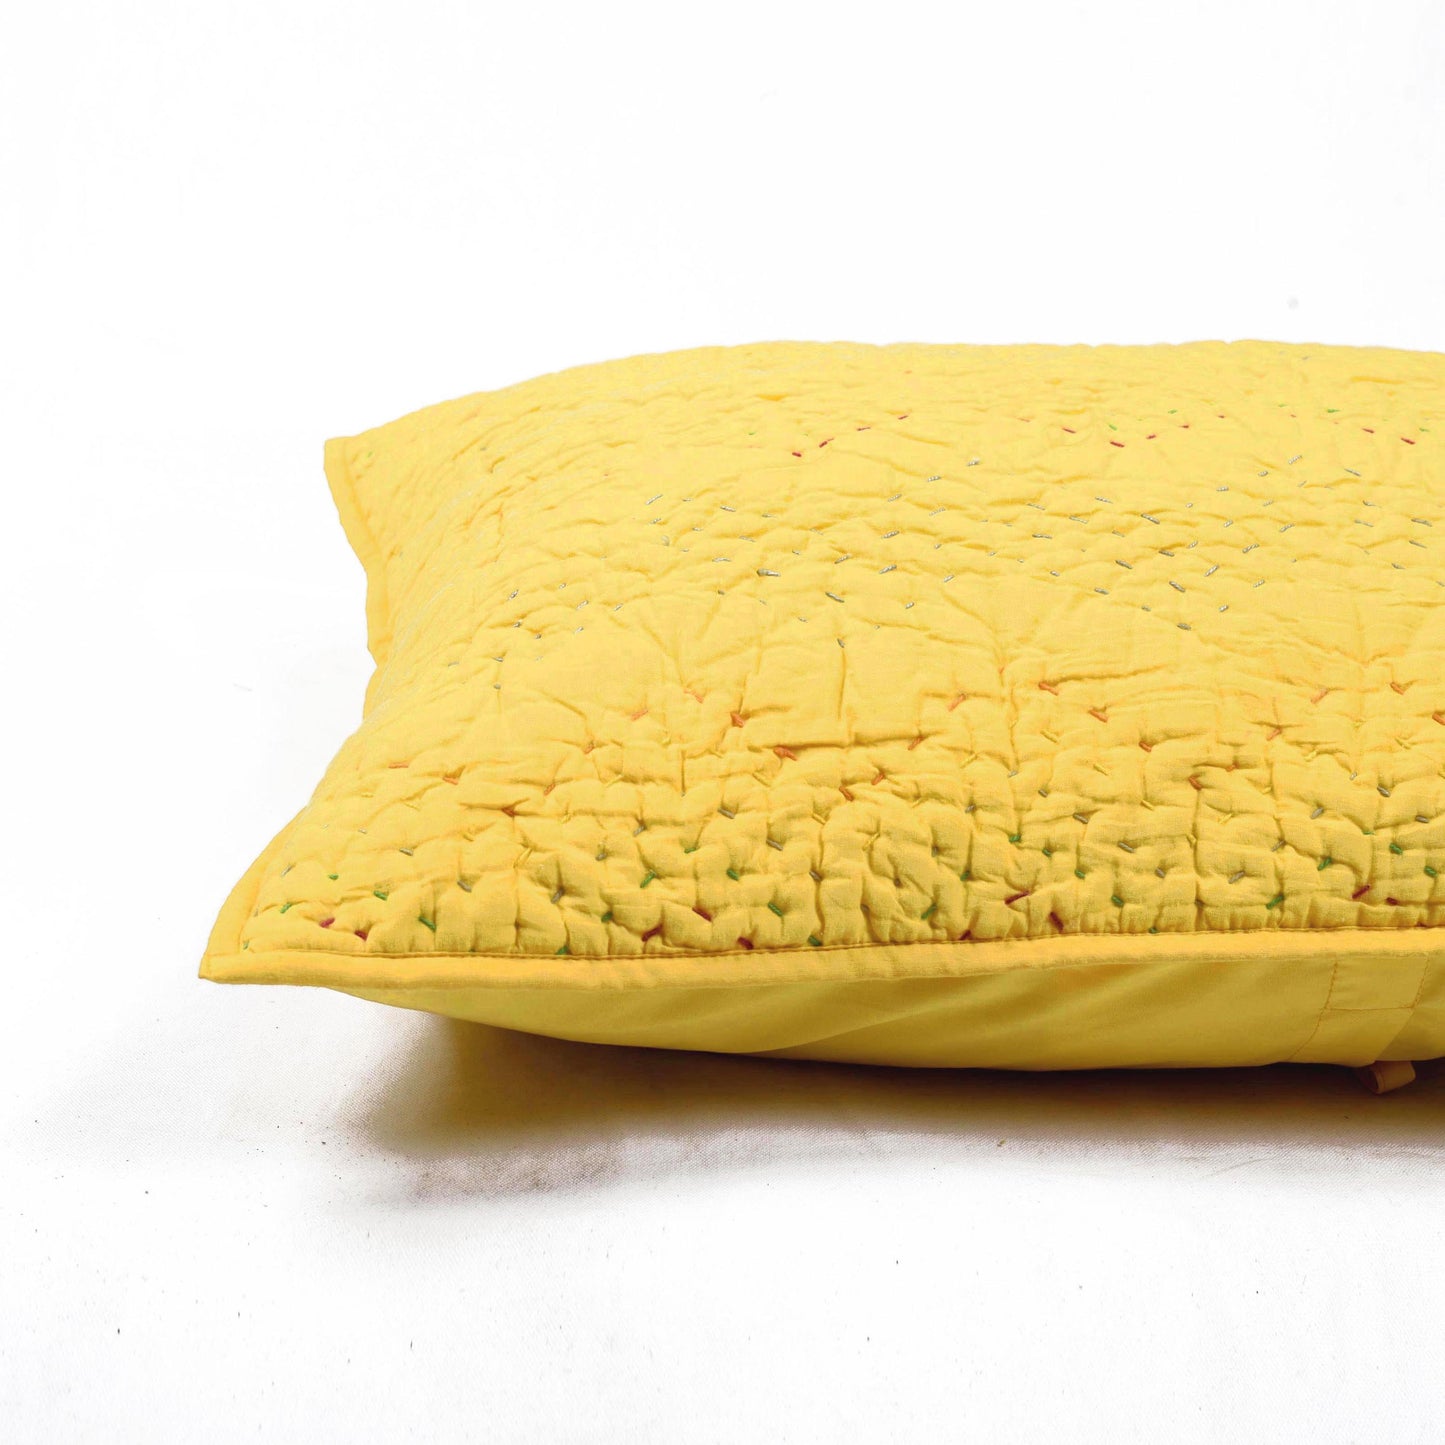 Yellow kantha quilted cotton pillow cover, chevron pattern, sizes available